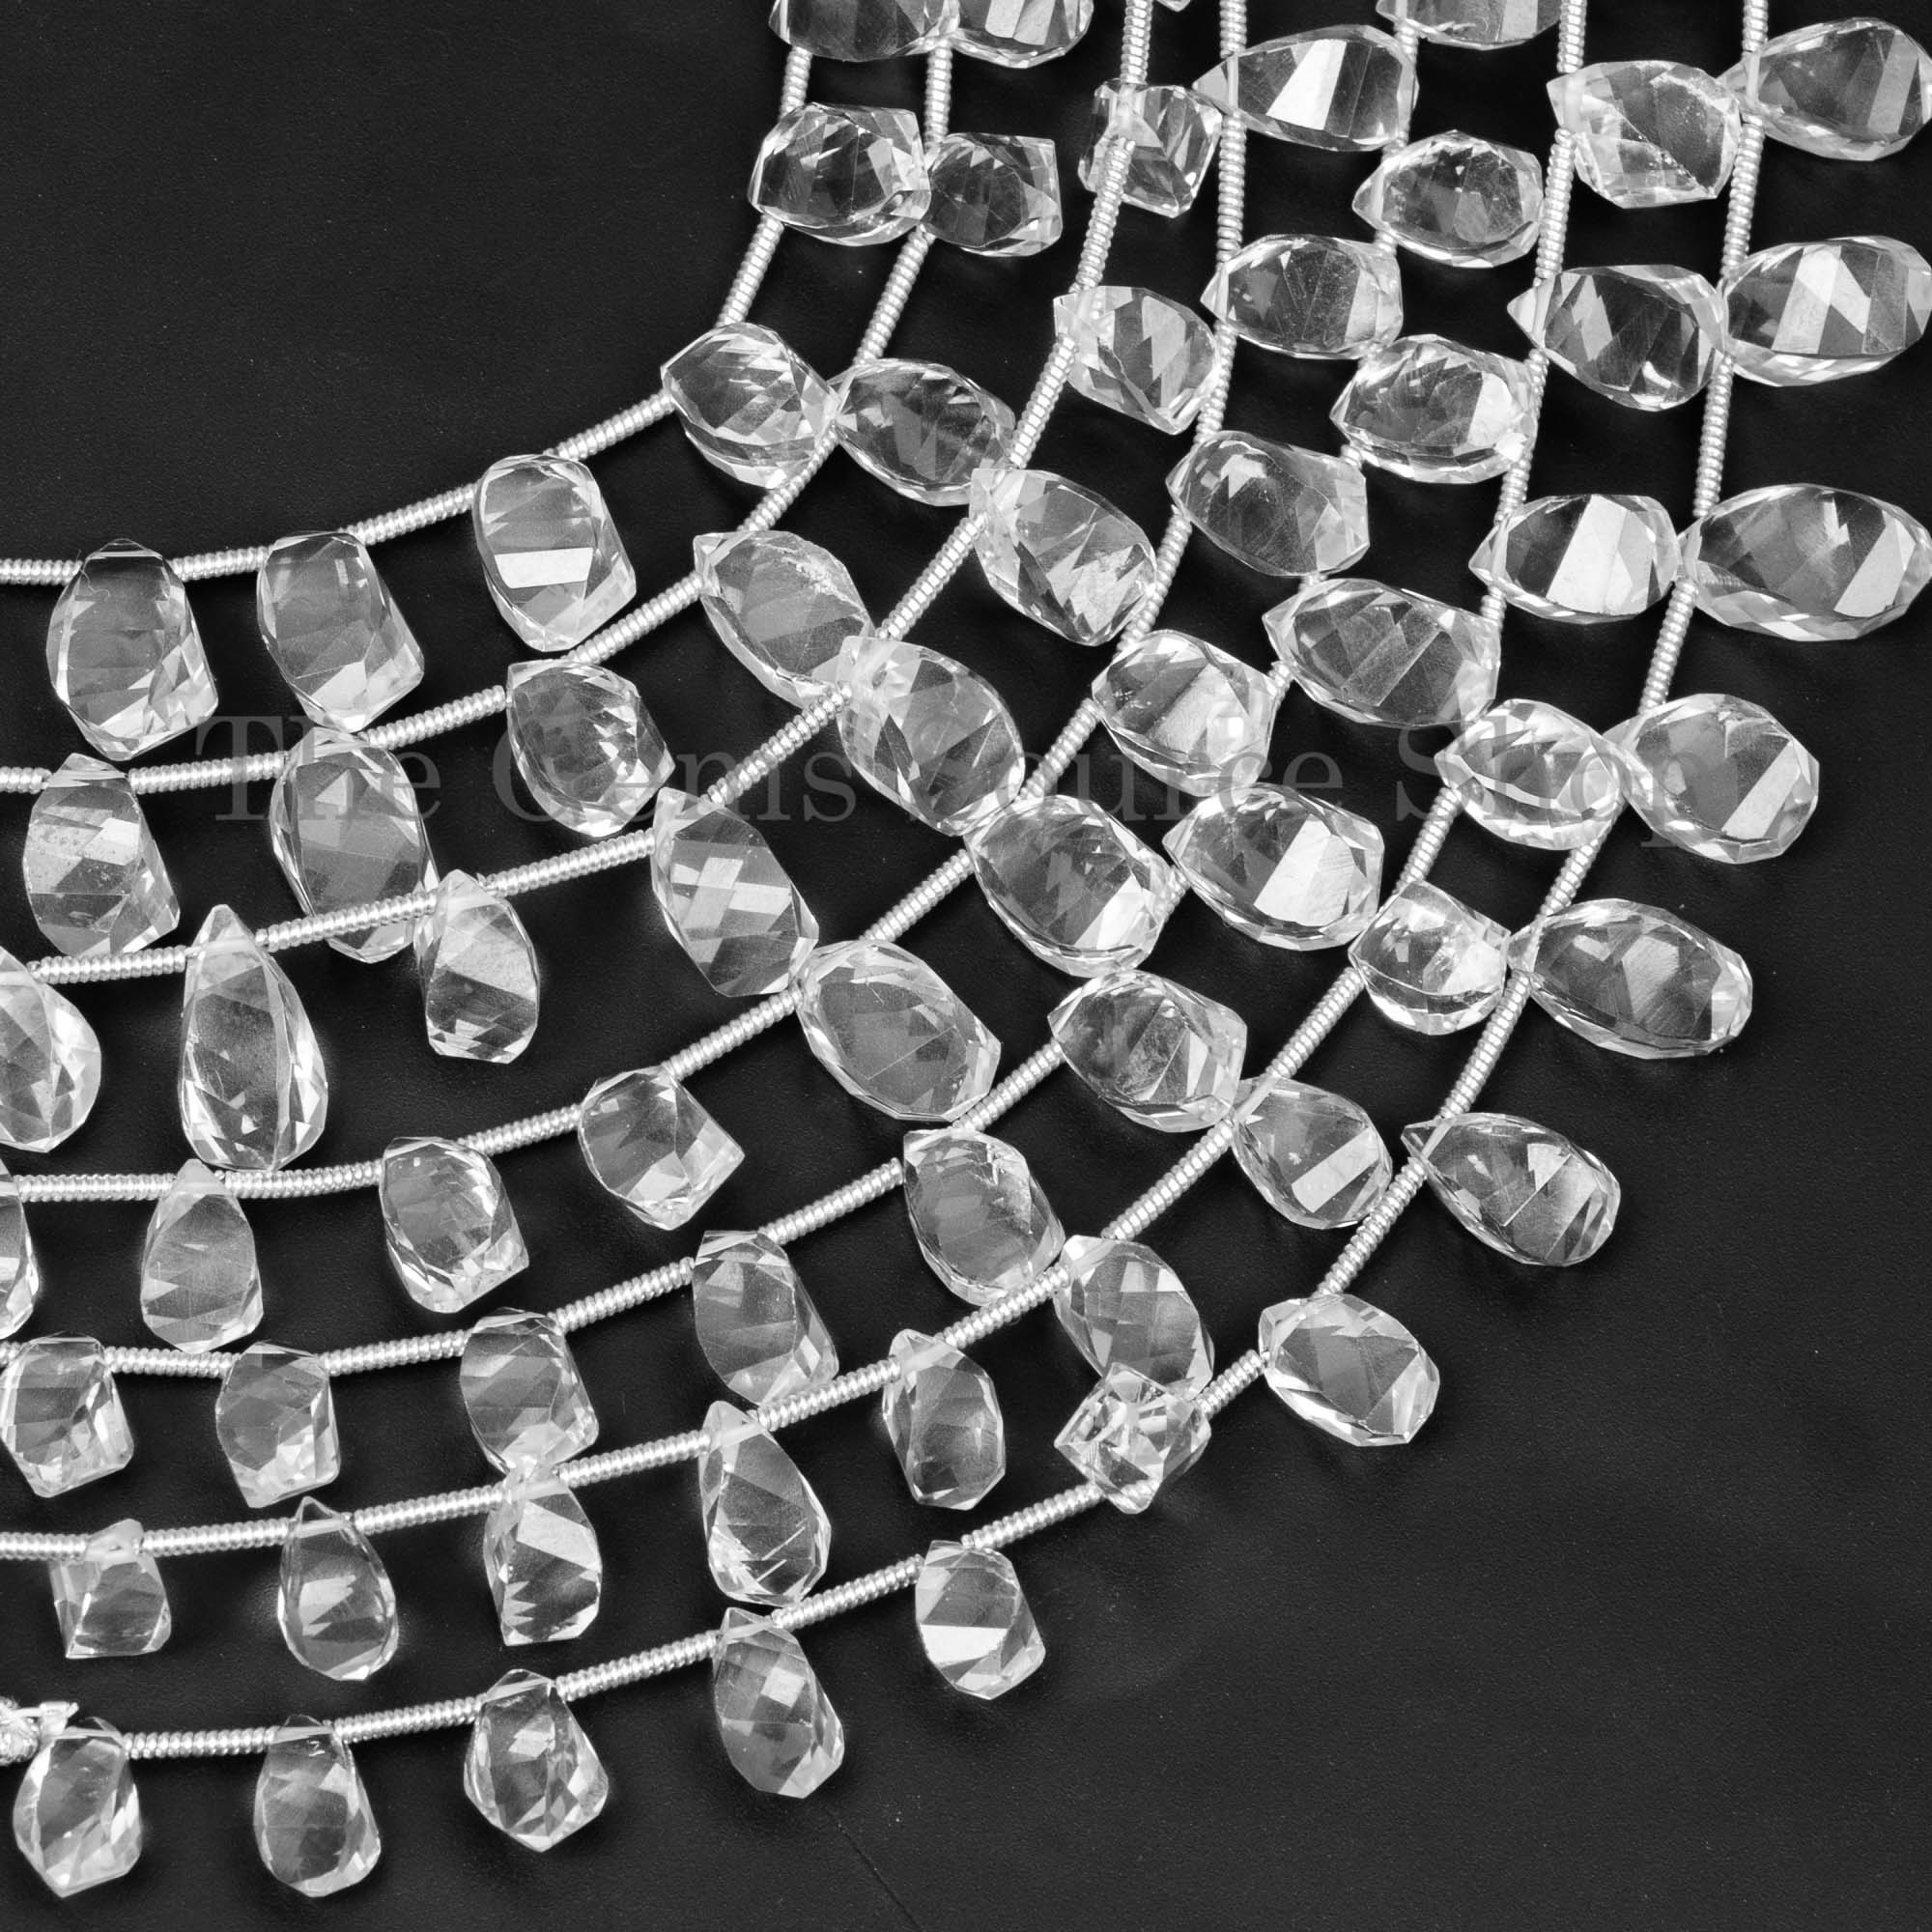 Crystal Quartz Faceted Twisted Drop Beads, Crystal Quartz Fancy Drop Beads